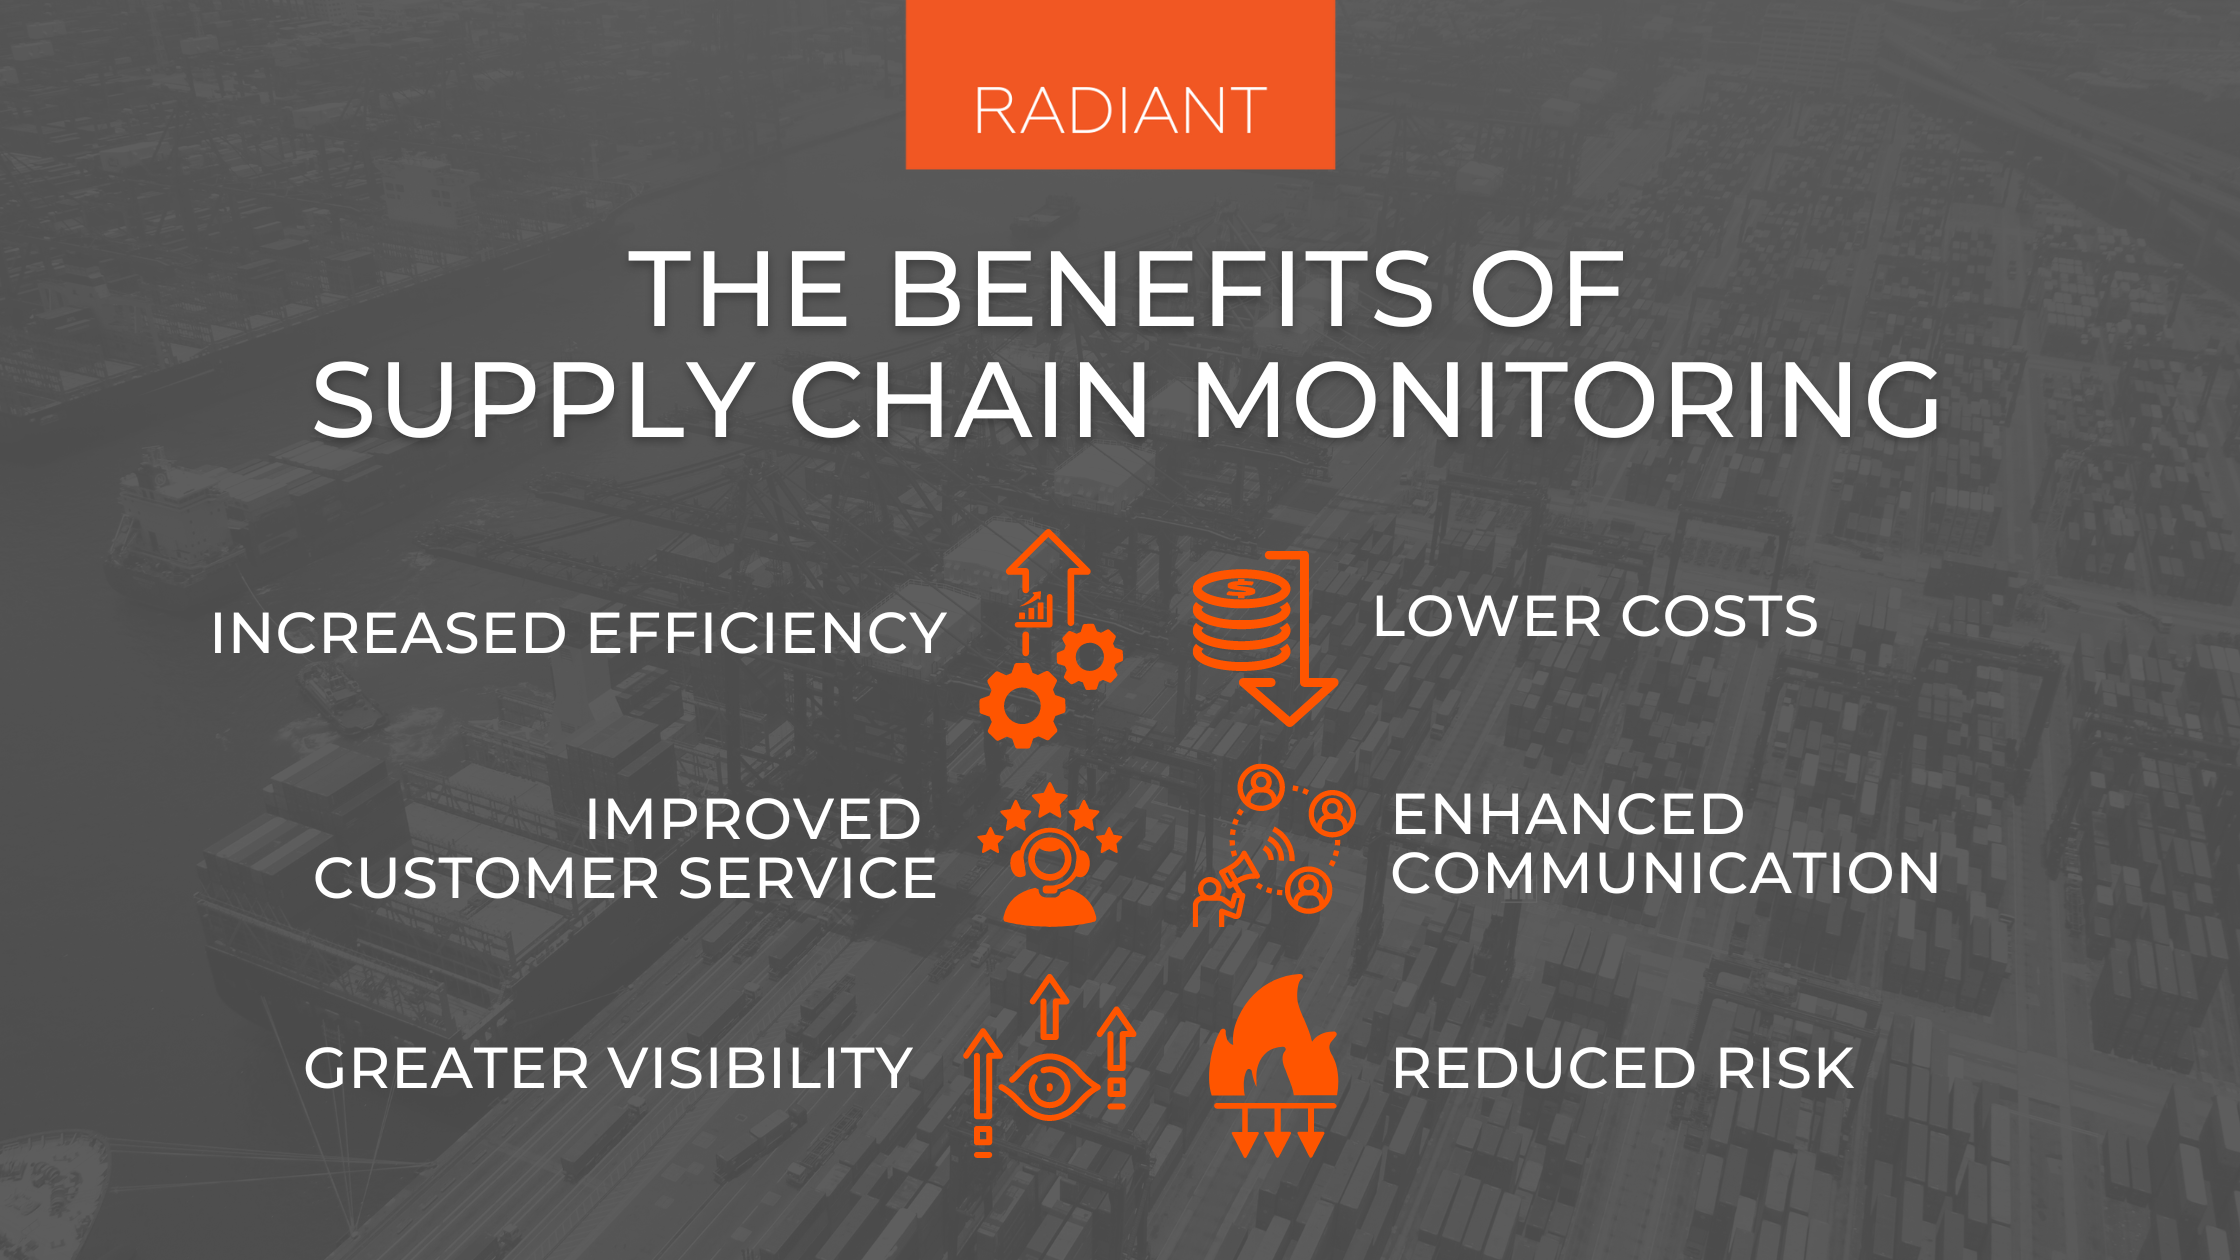 Benefits Of Supply Chain Monitoring - Supply Chain Monitoring - Supply Chain Monitoring Tools - Supply Chain Monitoring Software - Supply Chain Monitoring System - Supply Chain Risk Monitoring - Supply Chain And Logistics Monitoring - What Is Supply Chain Monitoring - How To Monitor Supply Chain Performance - Monitoring Supply Chain Performance - Supply Chain Management